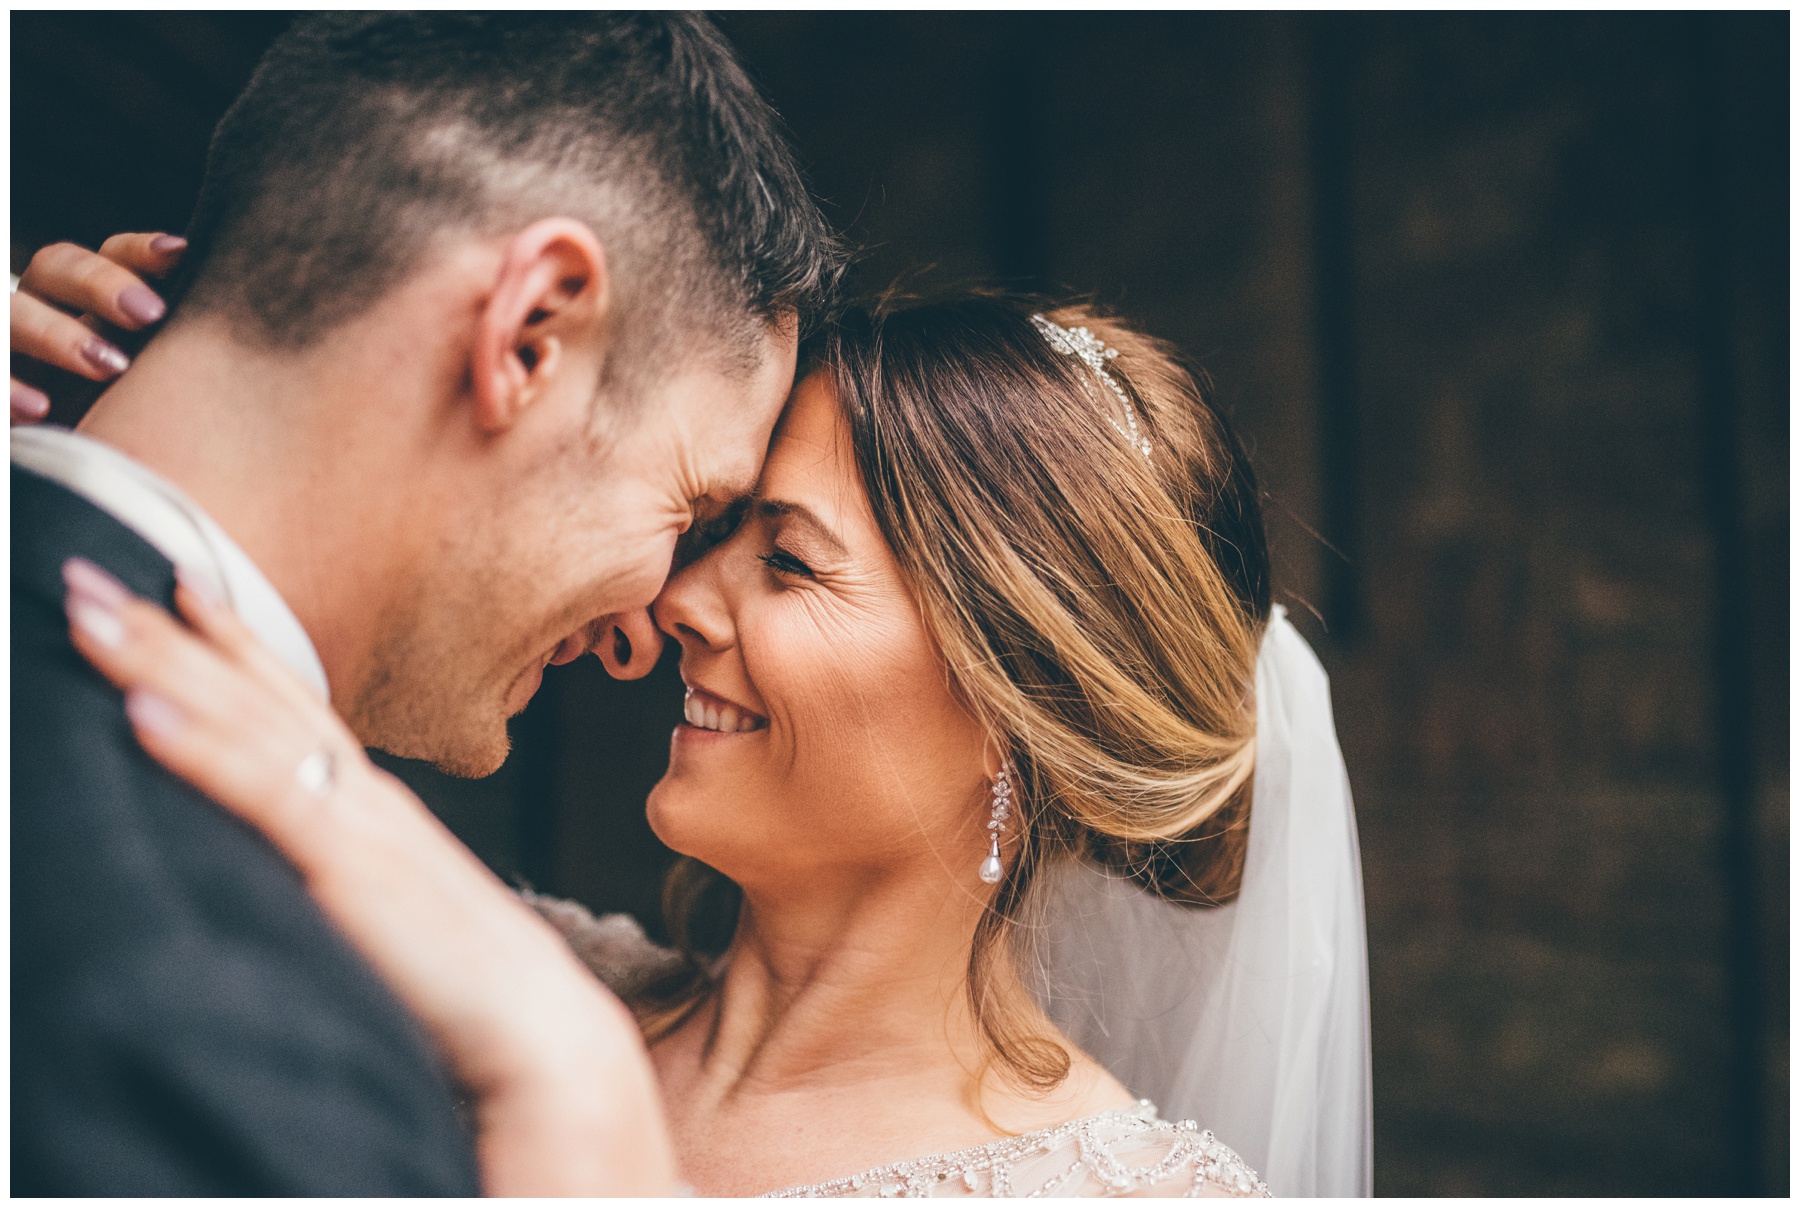 Bride and Groom snuggle together at their Disney themed Peckforton Castle wedding.